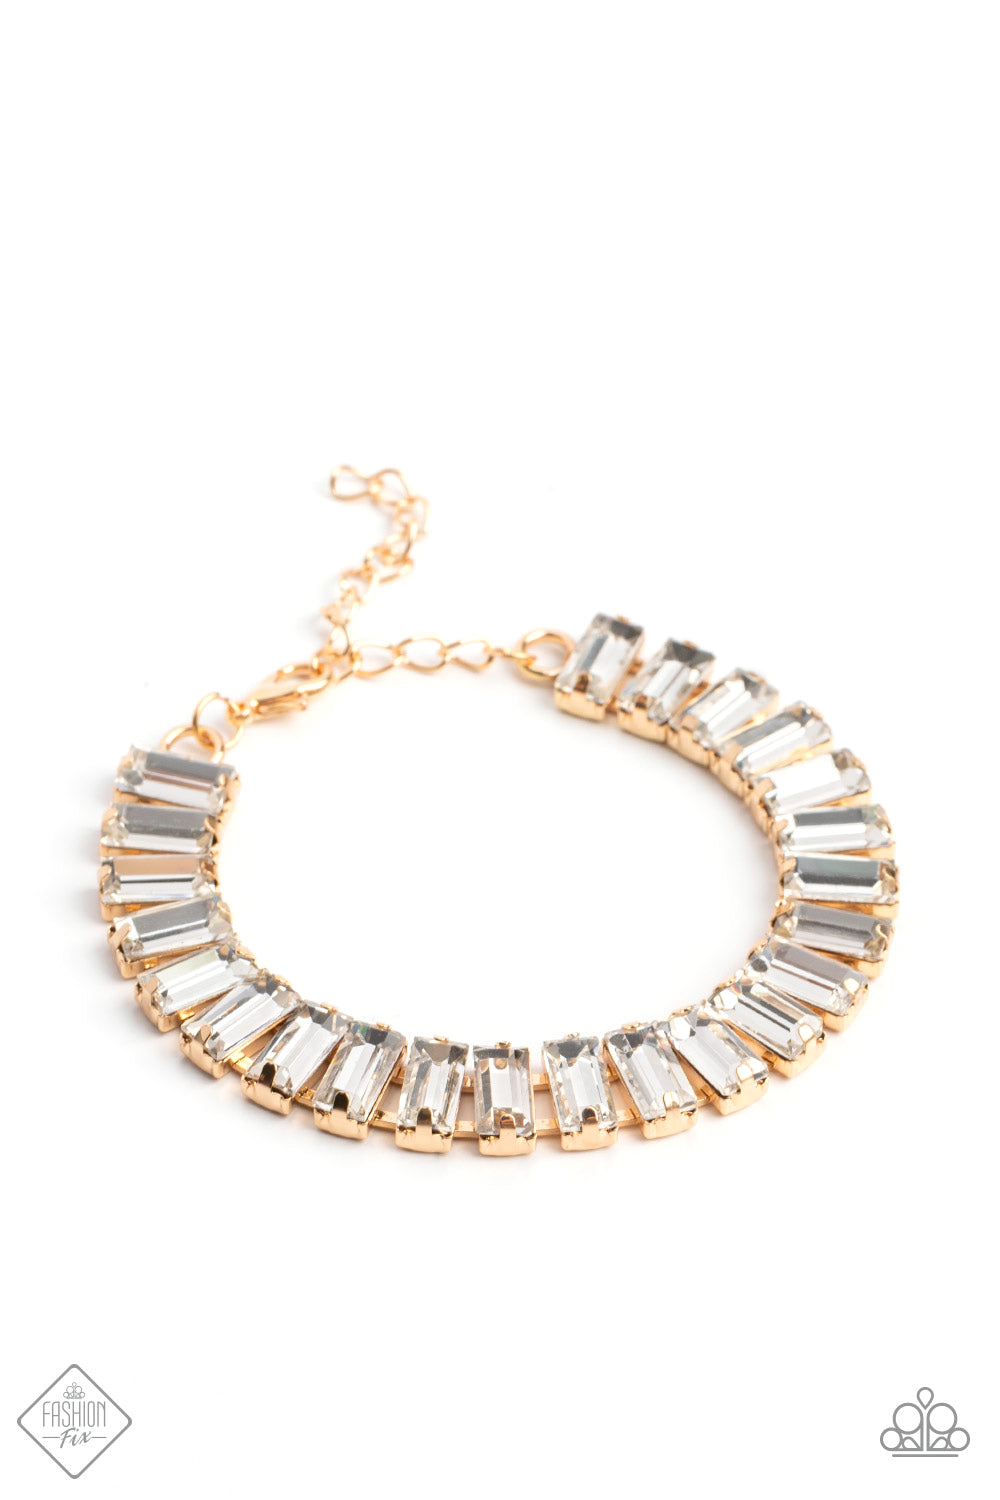 Darling Debutante - Gold Bracelet - Paparazzi Accessories -Set in prominent, pronged gold fittings, a glassy collection of emerald-cut, white gems fall in line around the wrist, creating a stunning, light-catching display. Features an adjustable clasp closure. Sold as one individual bracelet. 